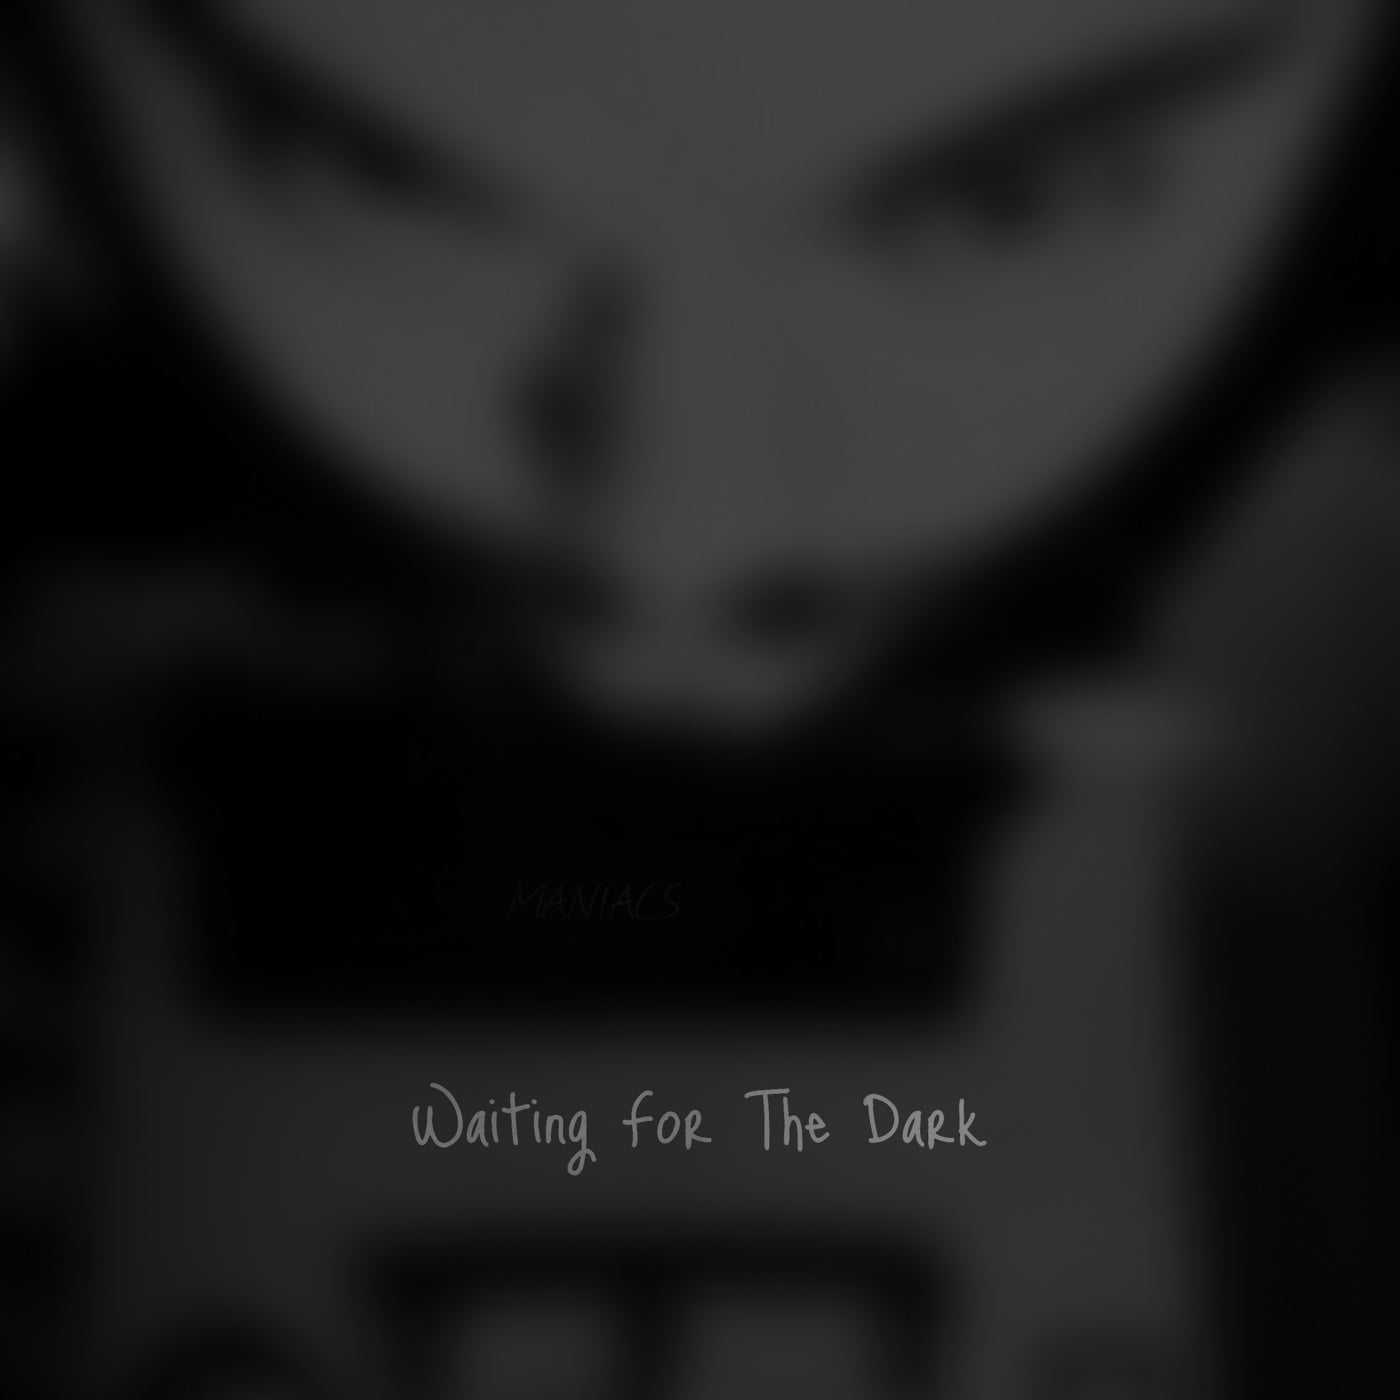 Waiting for the Dark